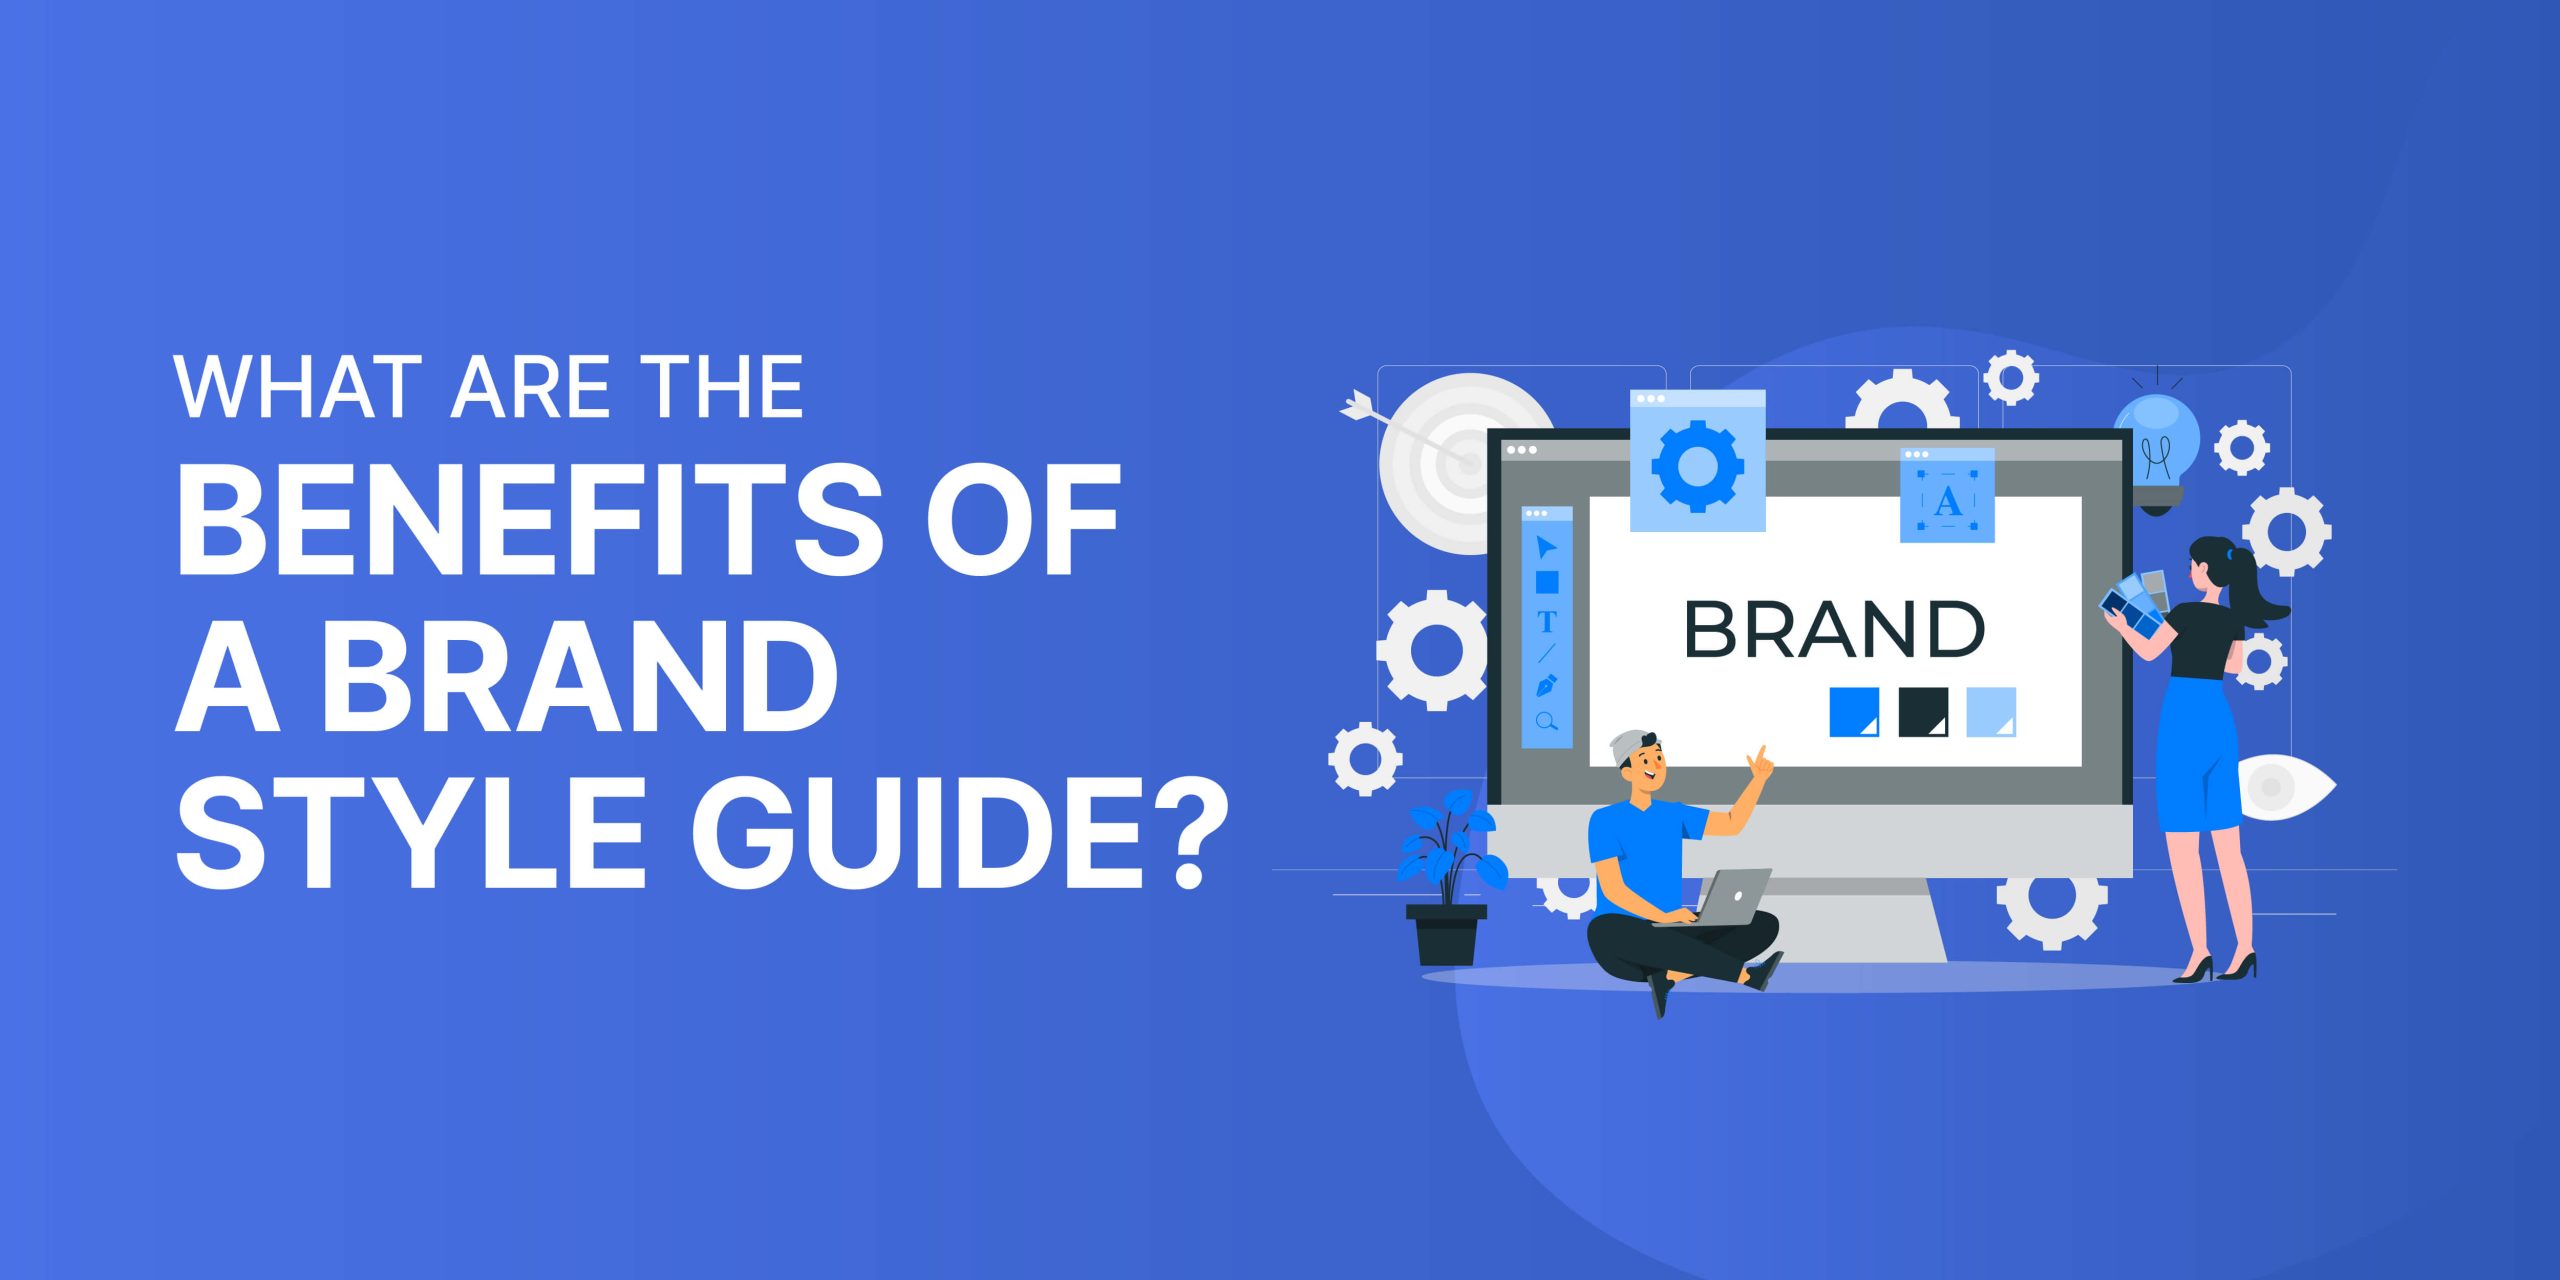 Benefits of Brand Style Guide